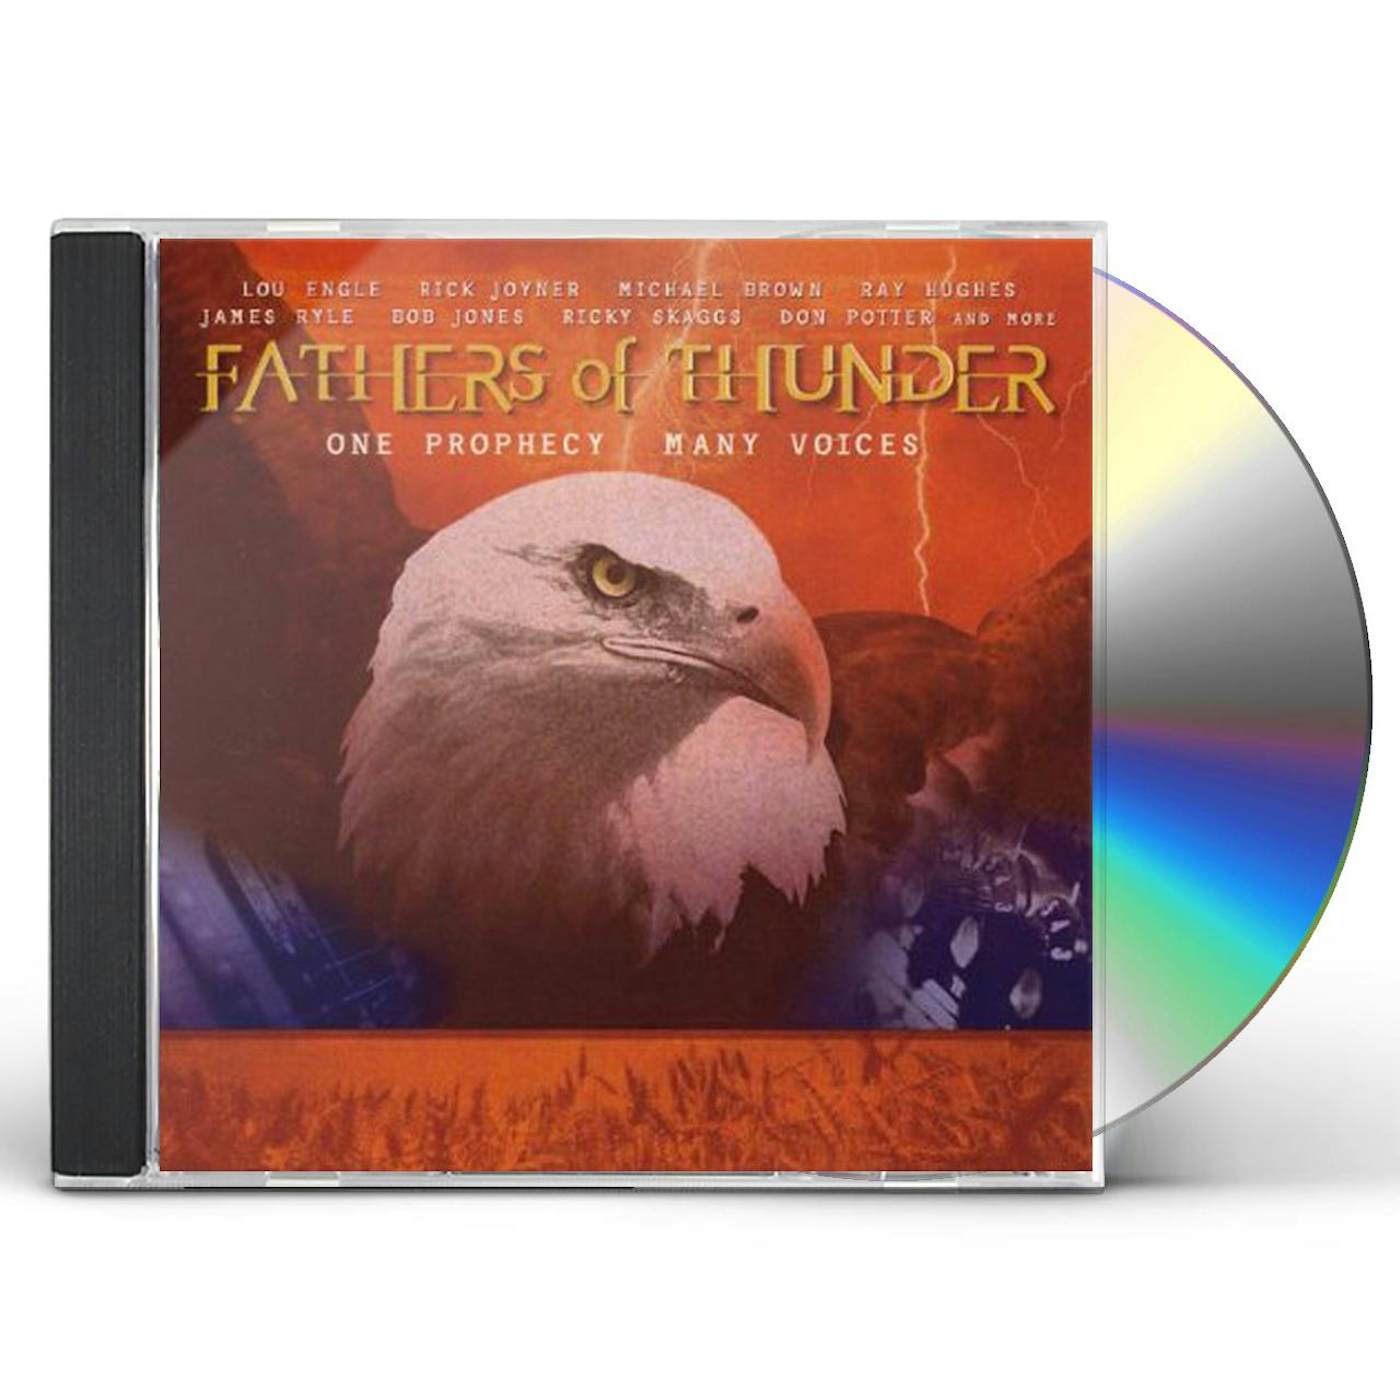 Harvest Sound FATHERS OF THUNDER CD